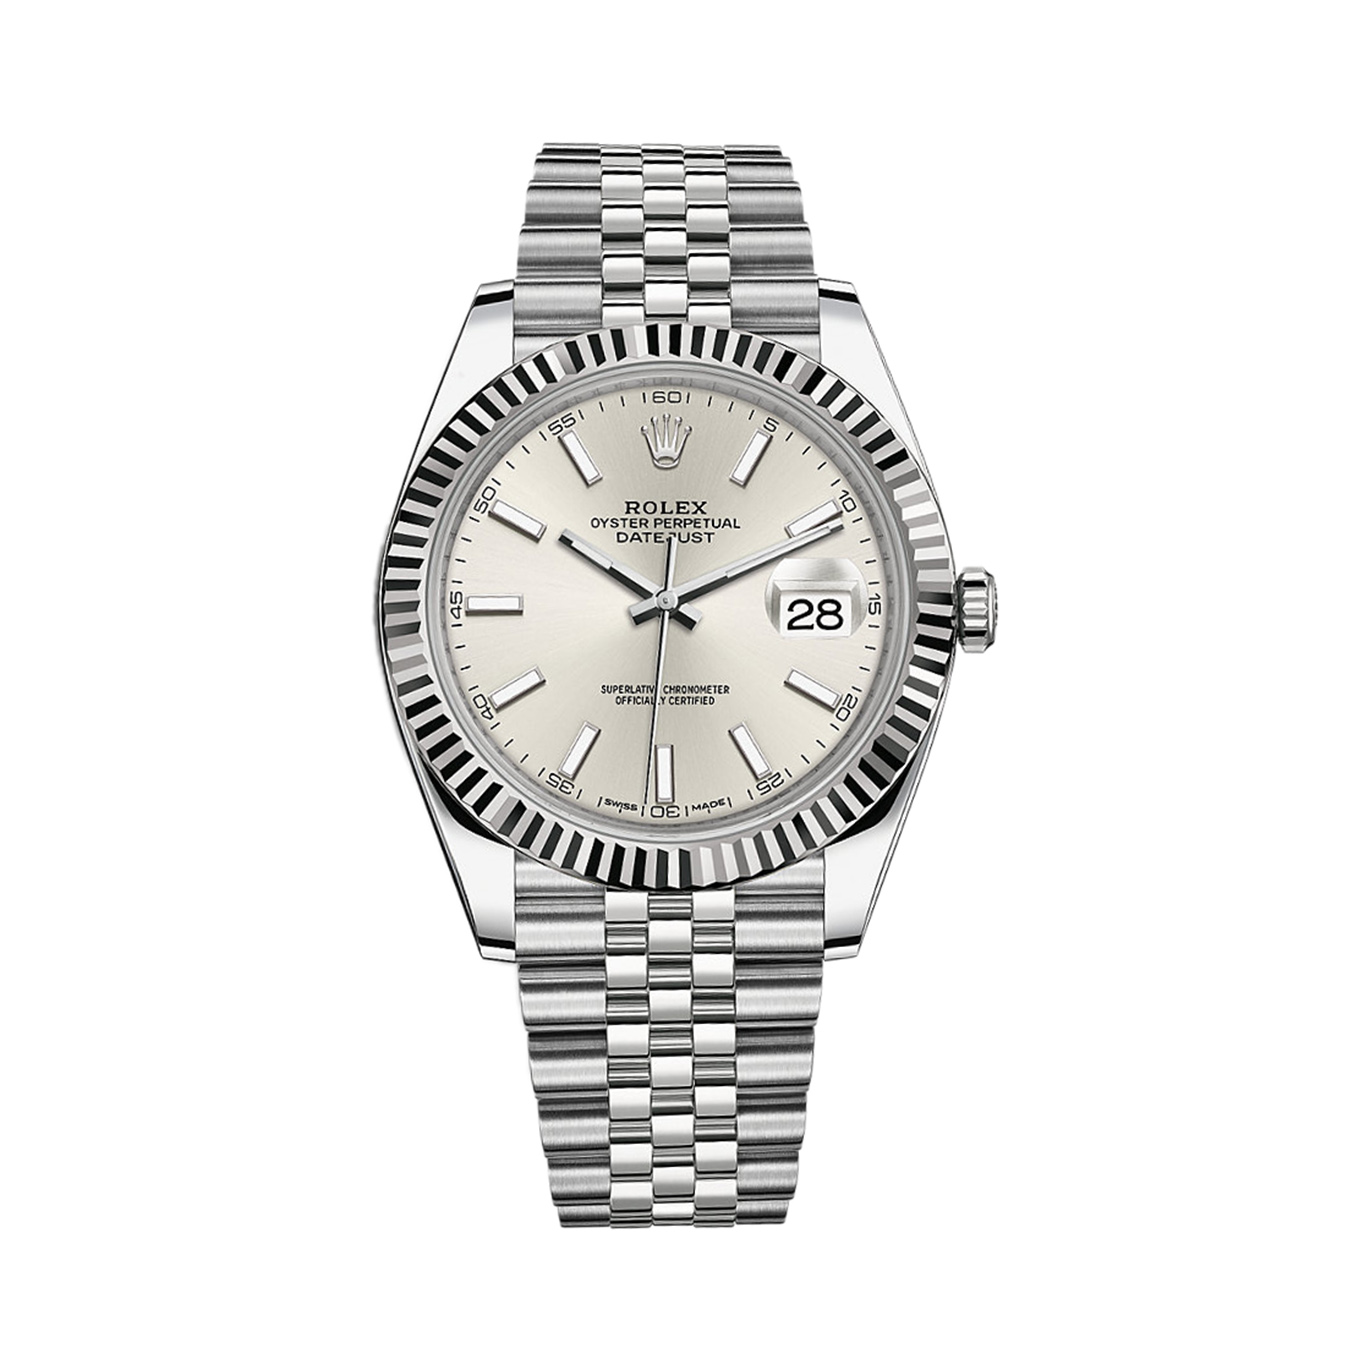 Datejust 41 126334 White Gold & Stainless Steel Watch (Silver)